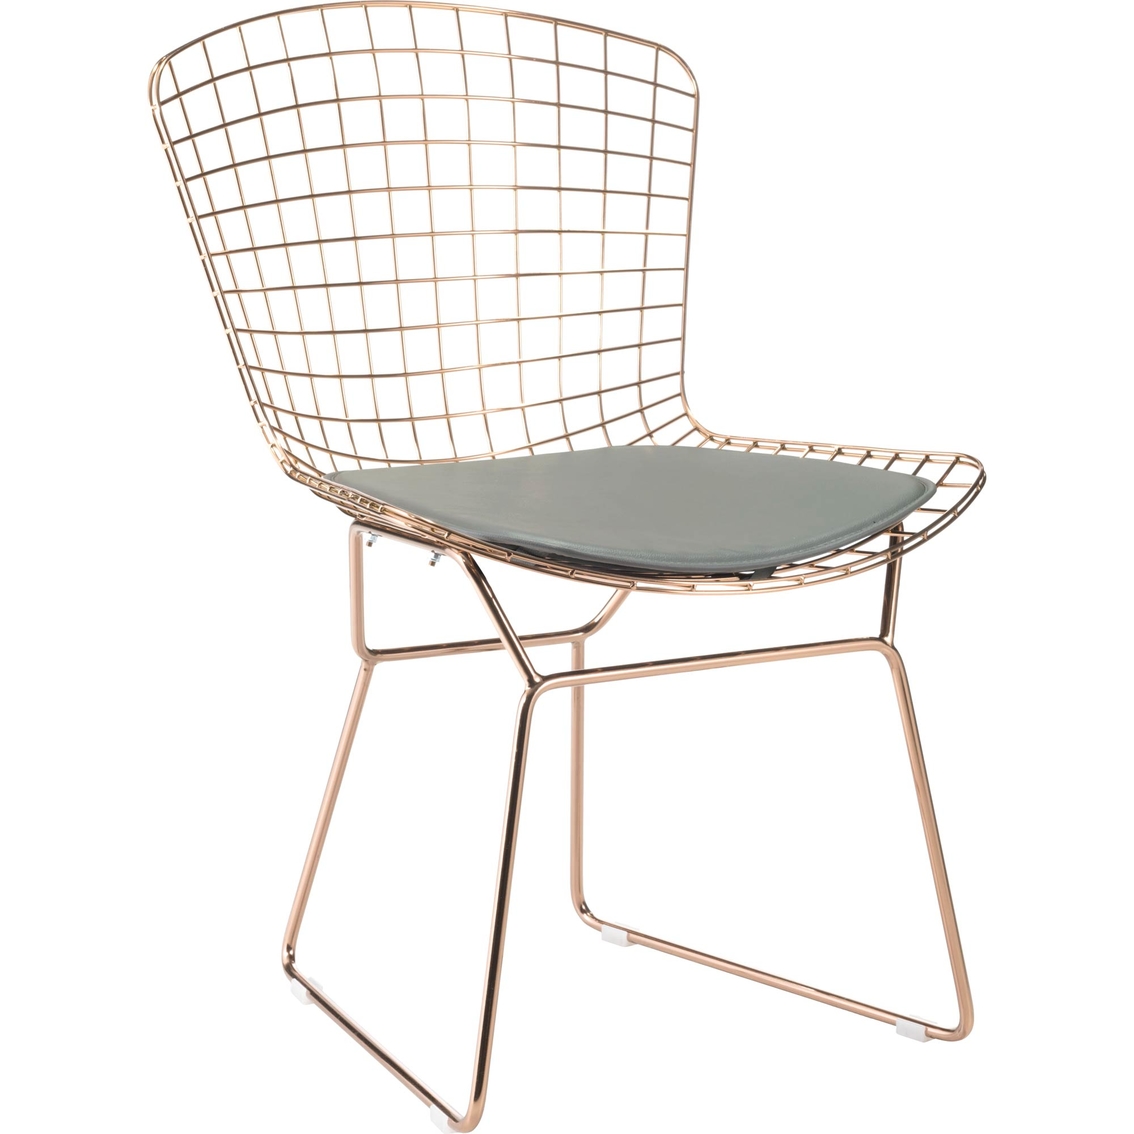 Zuo Modern Wire Mesh Chair Cushion - Image 4 of 4